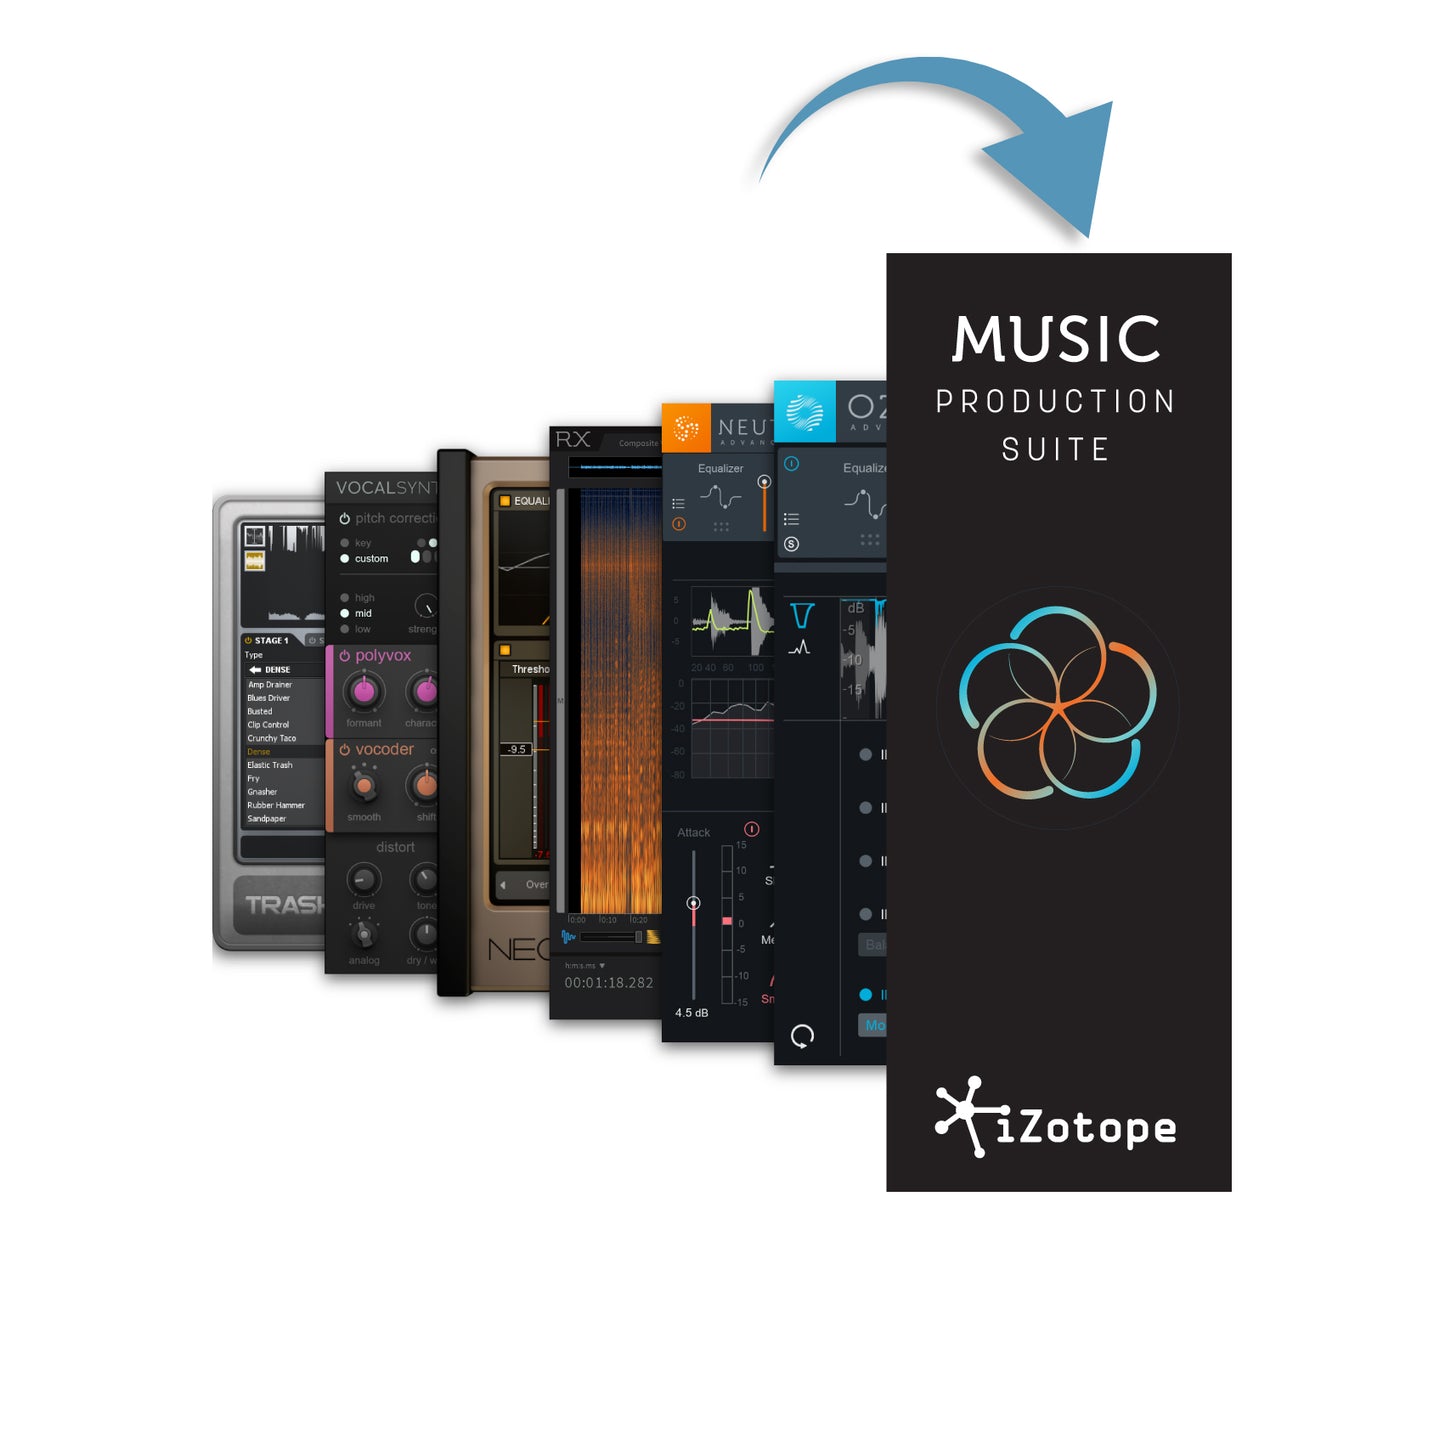 iZotope Music Production Suite (Crossgrade From Any Standard Product)